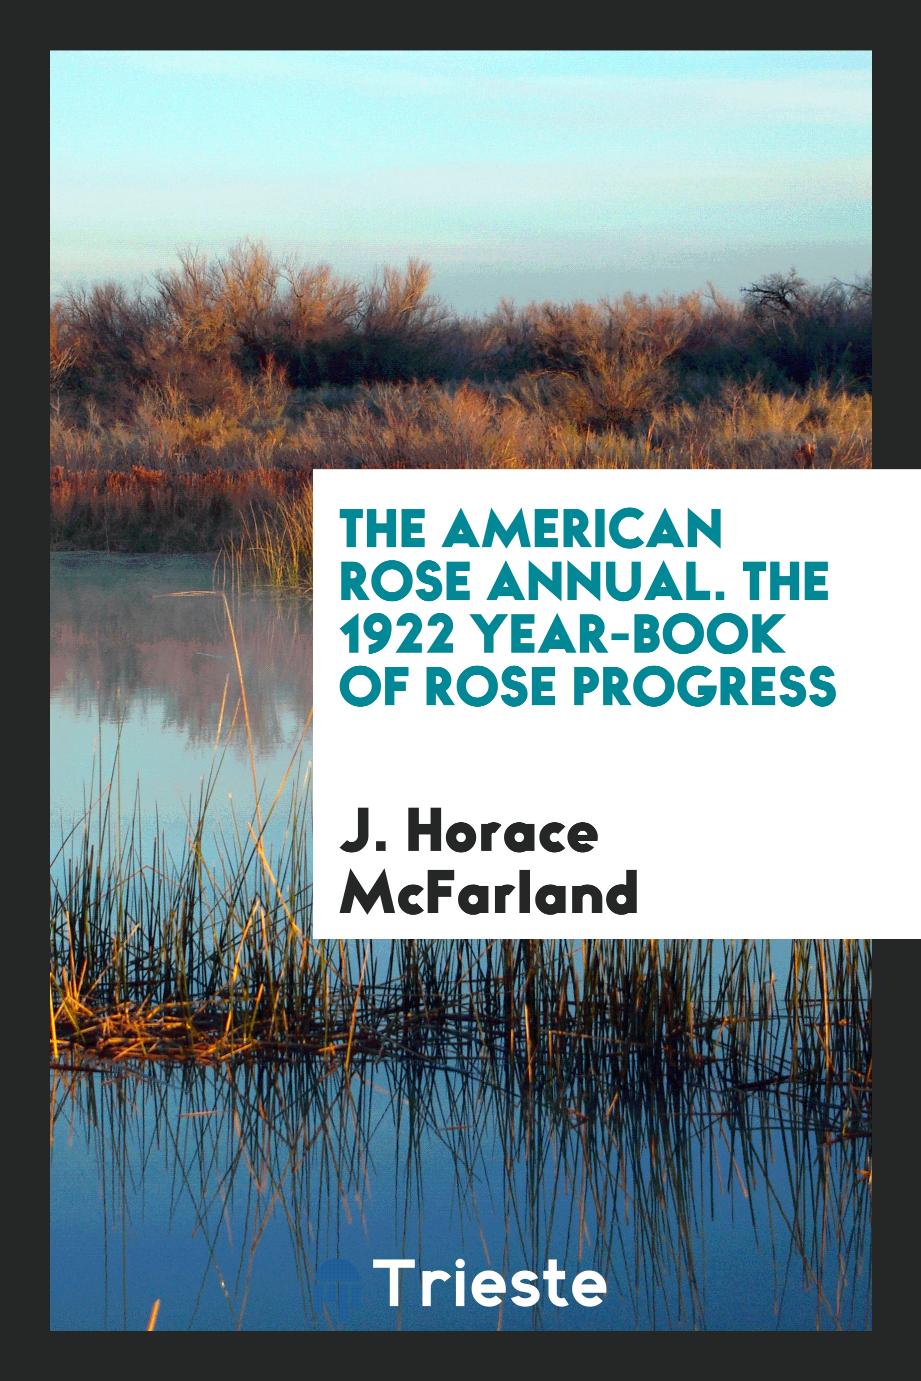 The American Rose Annual. The 1922 Year-Book of Rose Progress